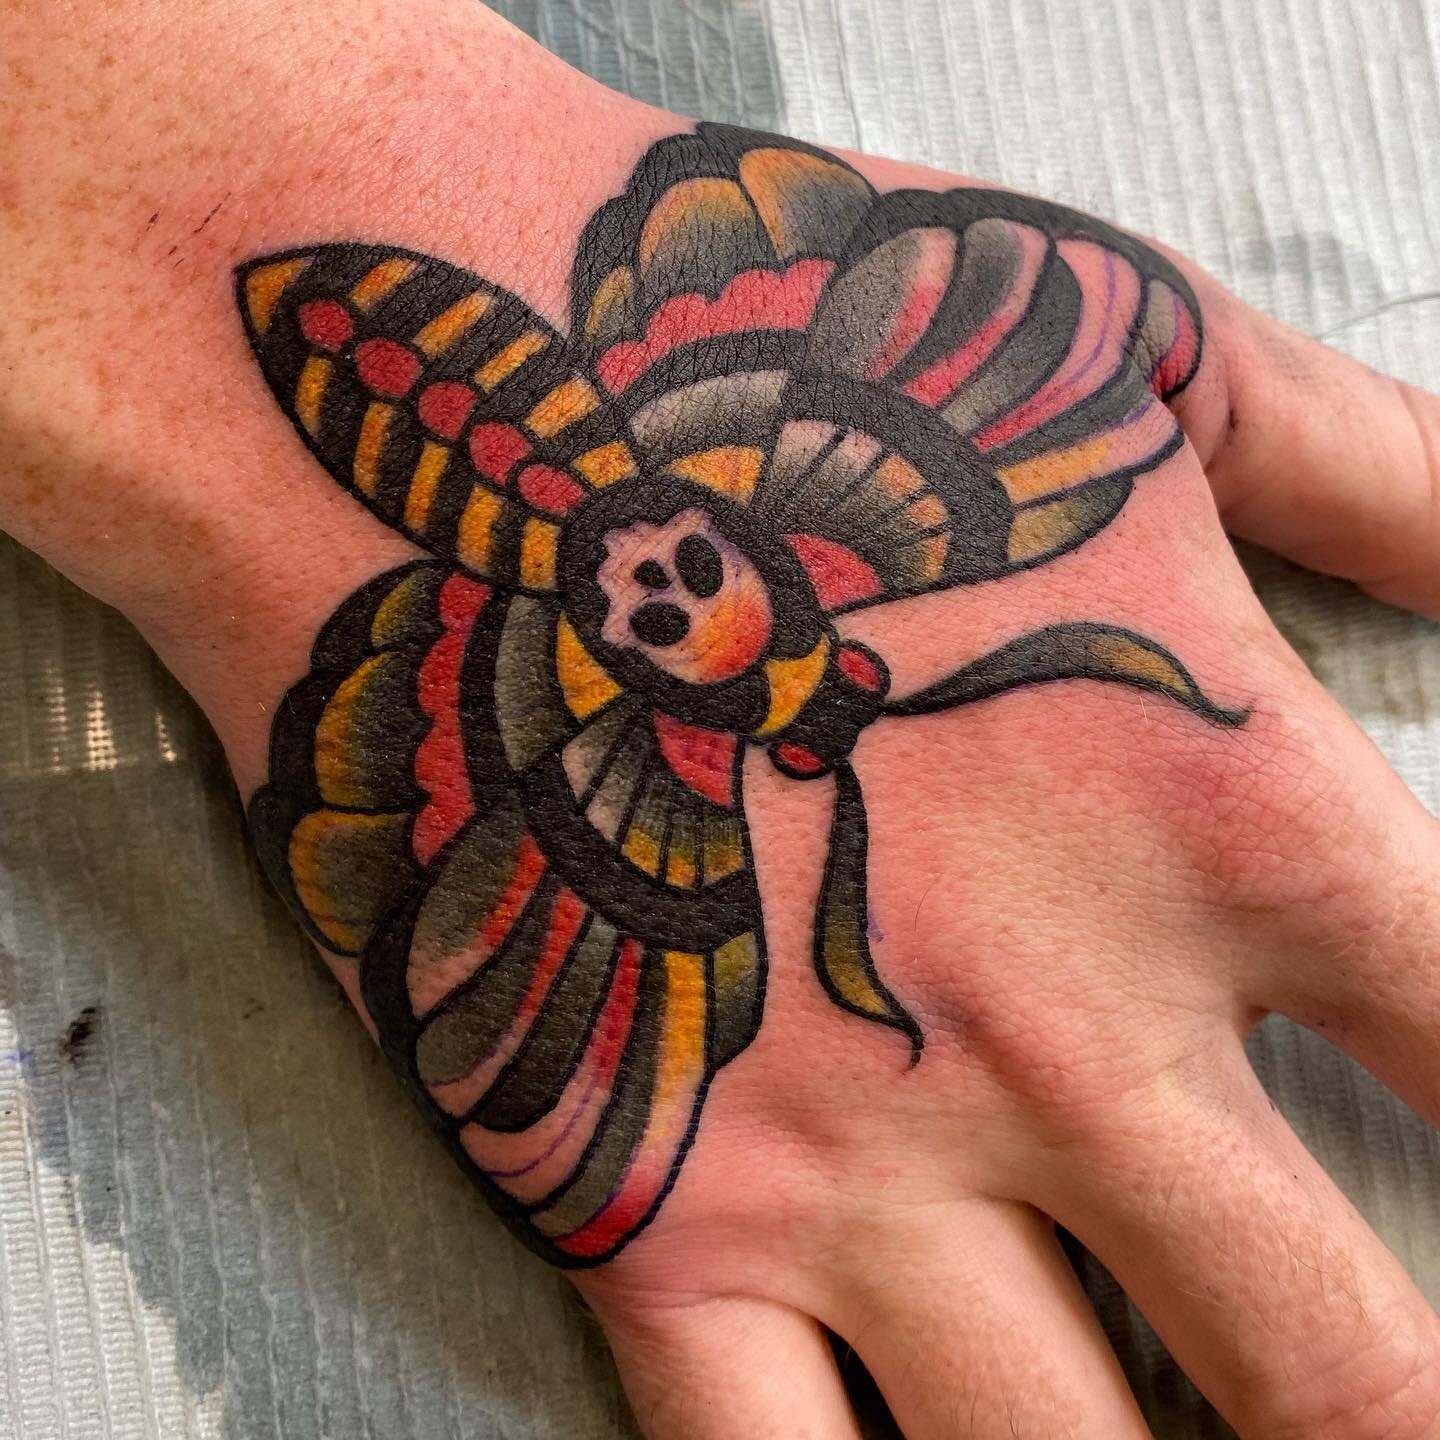 Angry ditch and hand! @randall_johnson you are tougher than most! @snakeoiltattoo #handtattoo #ditchtattoo #moth #nails #tradtattoos #kentuckytattooers